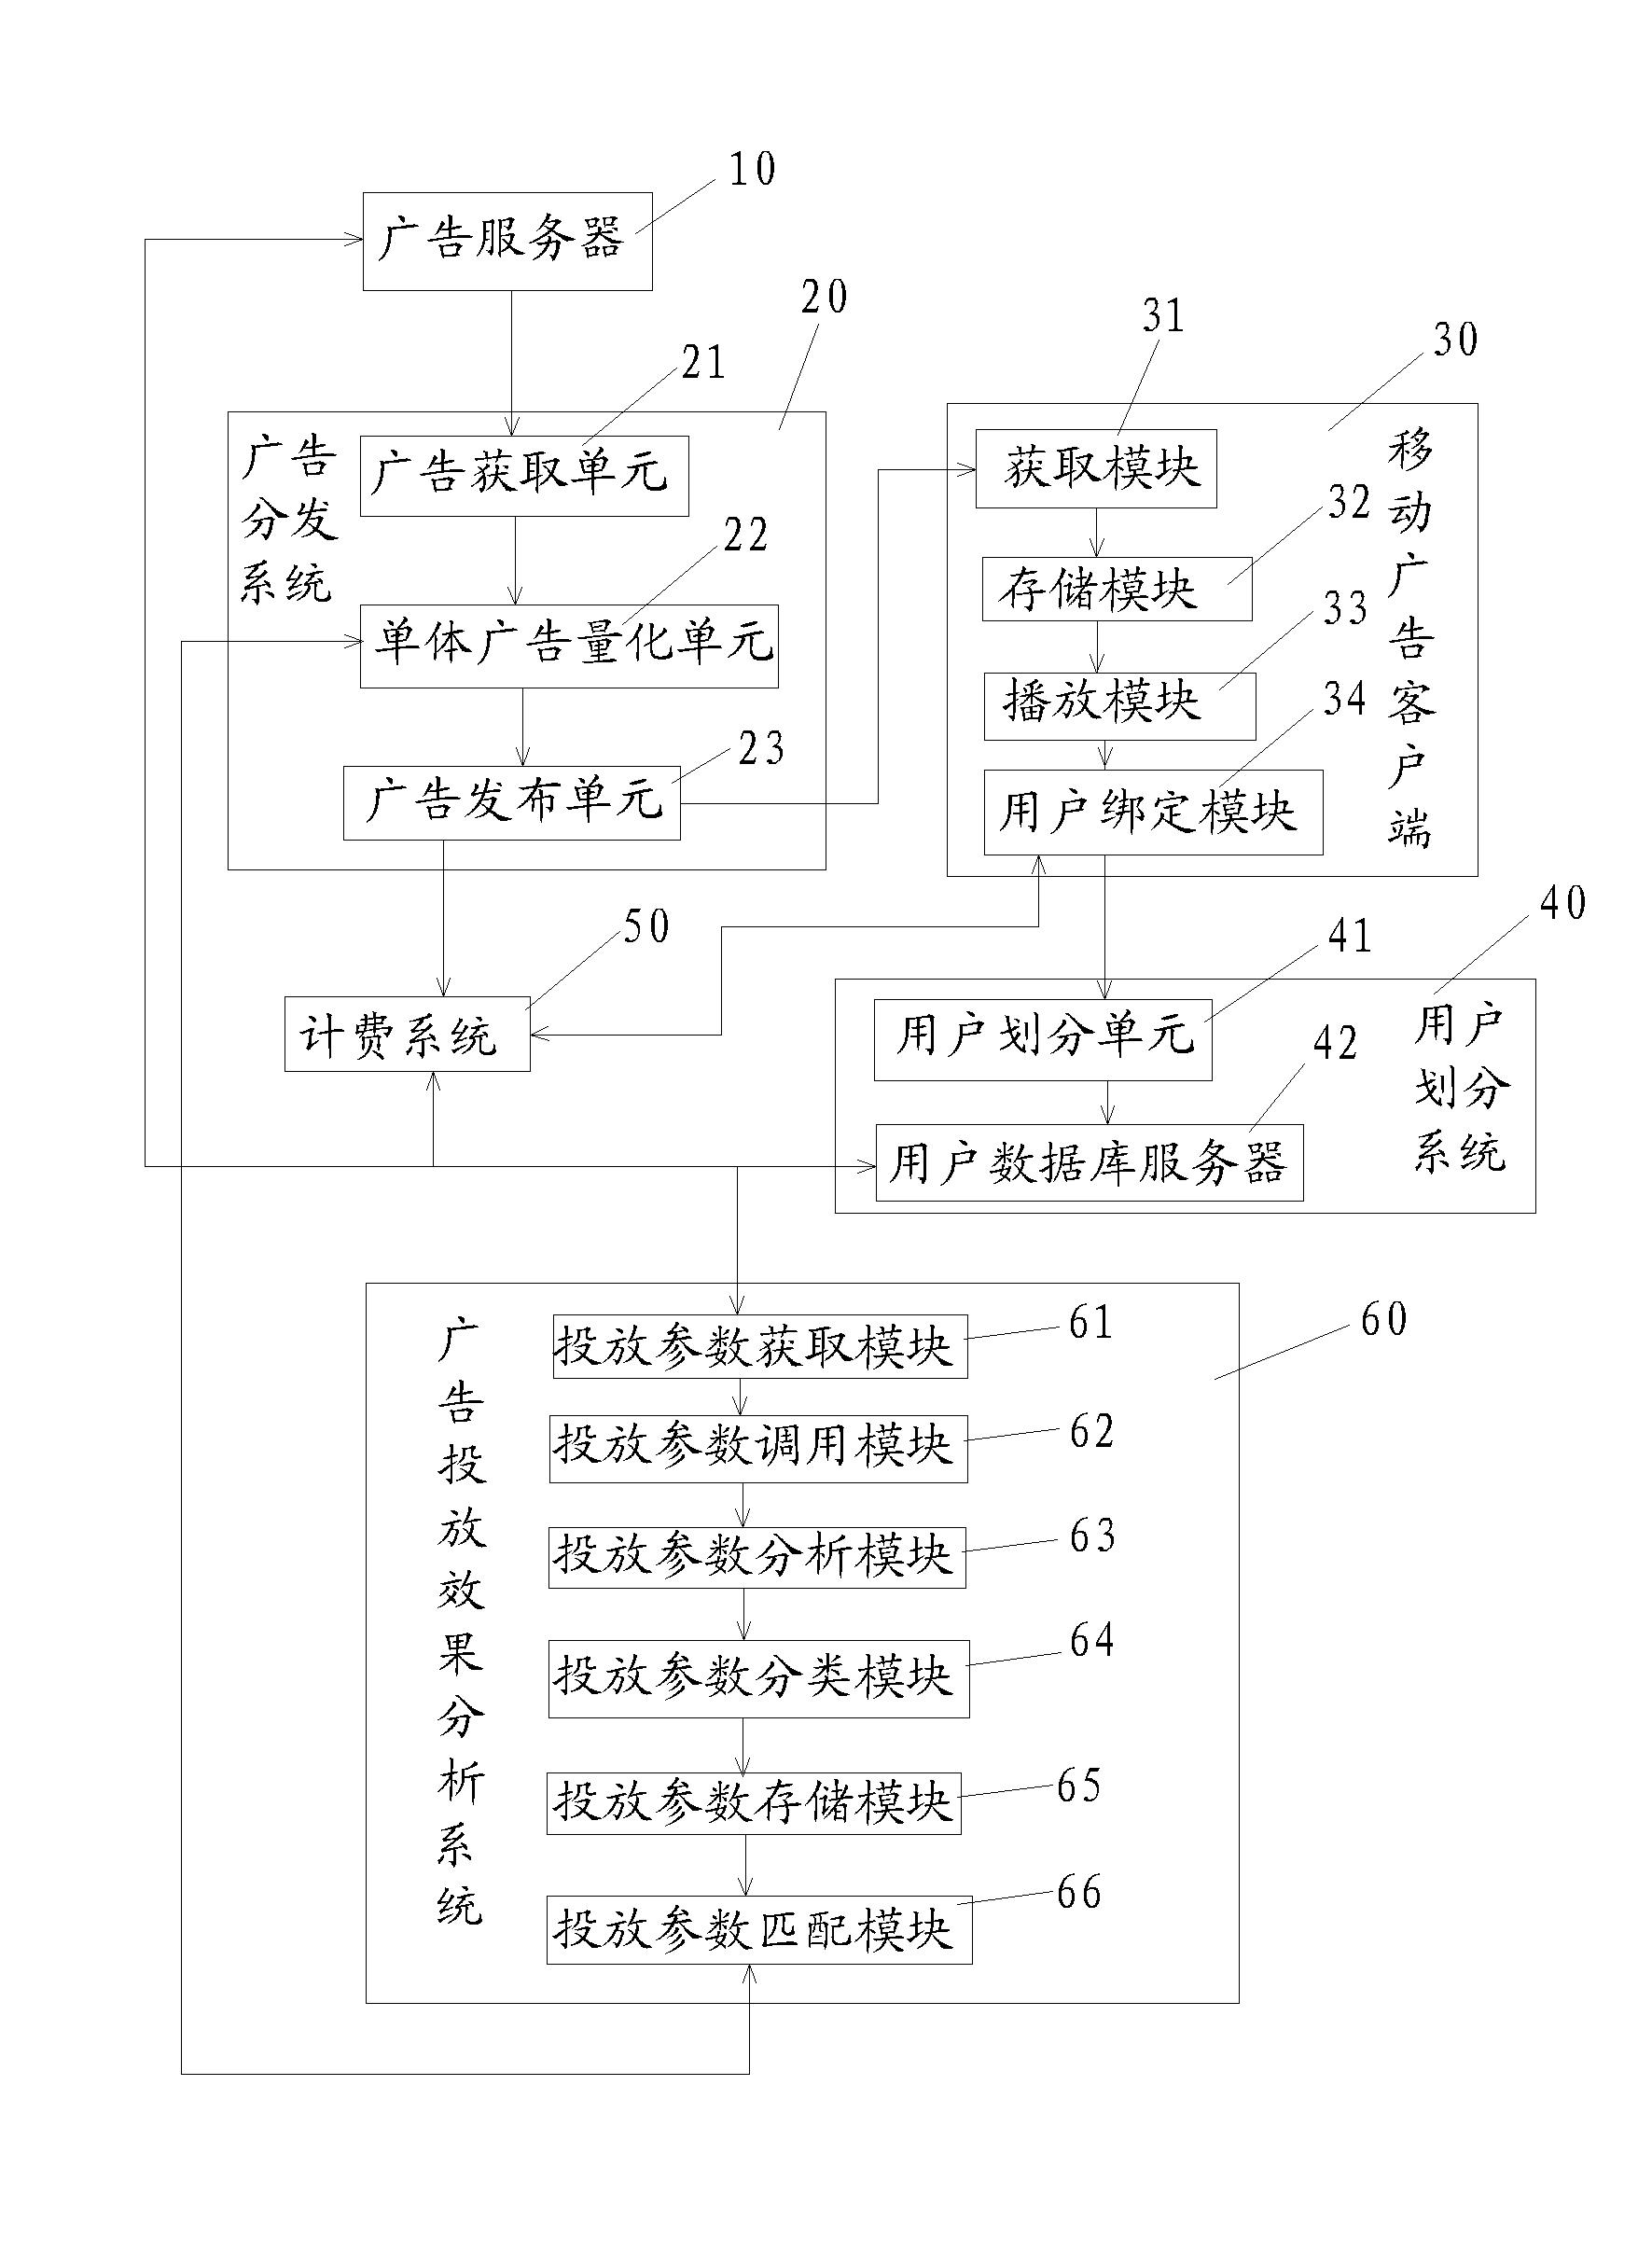 Advertising release system and advertising release method capable of accurately quantizing and counting release effects